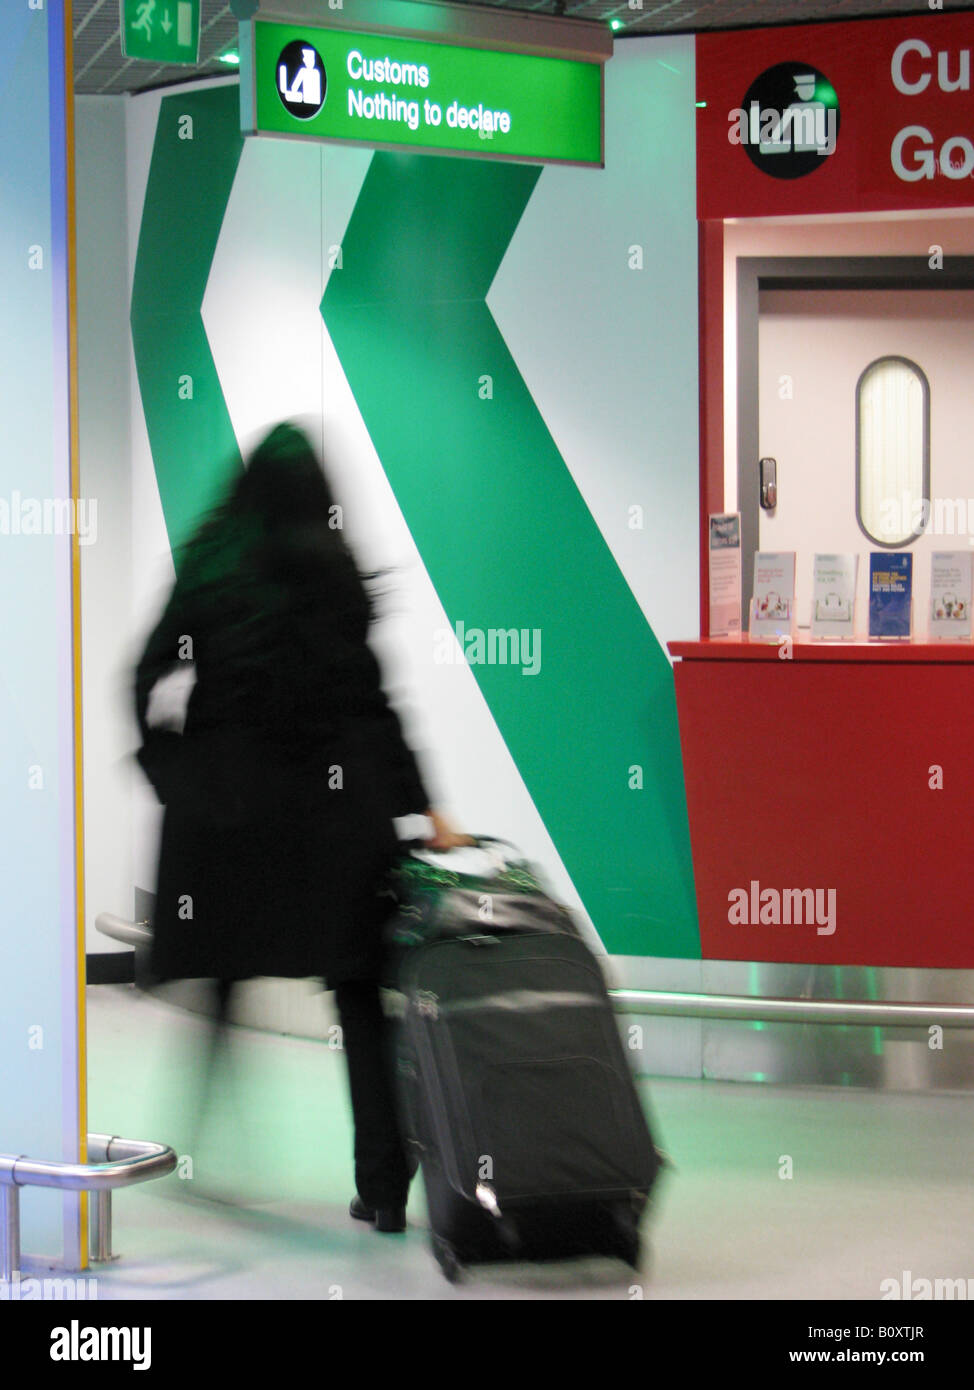 Female traveller passing an illuminated sign at the airport showing a symbol of the customs -  'Nothing to declare', United Kin Stock Photo